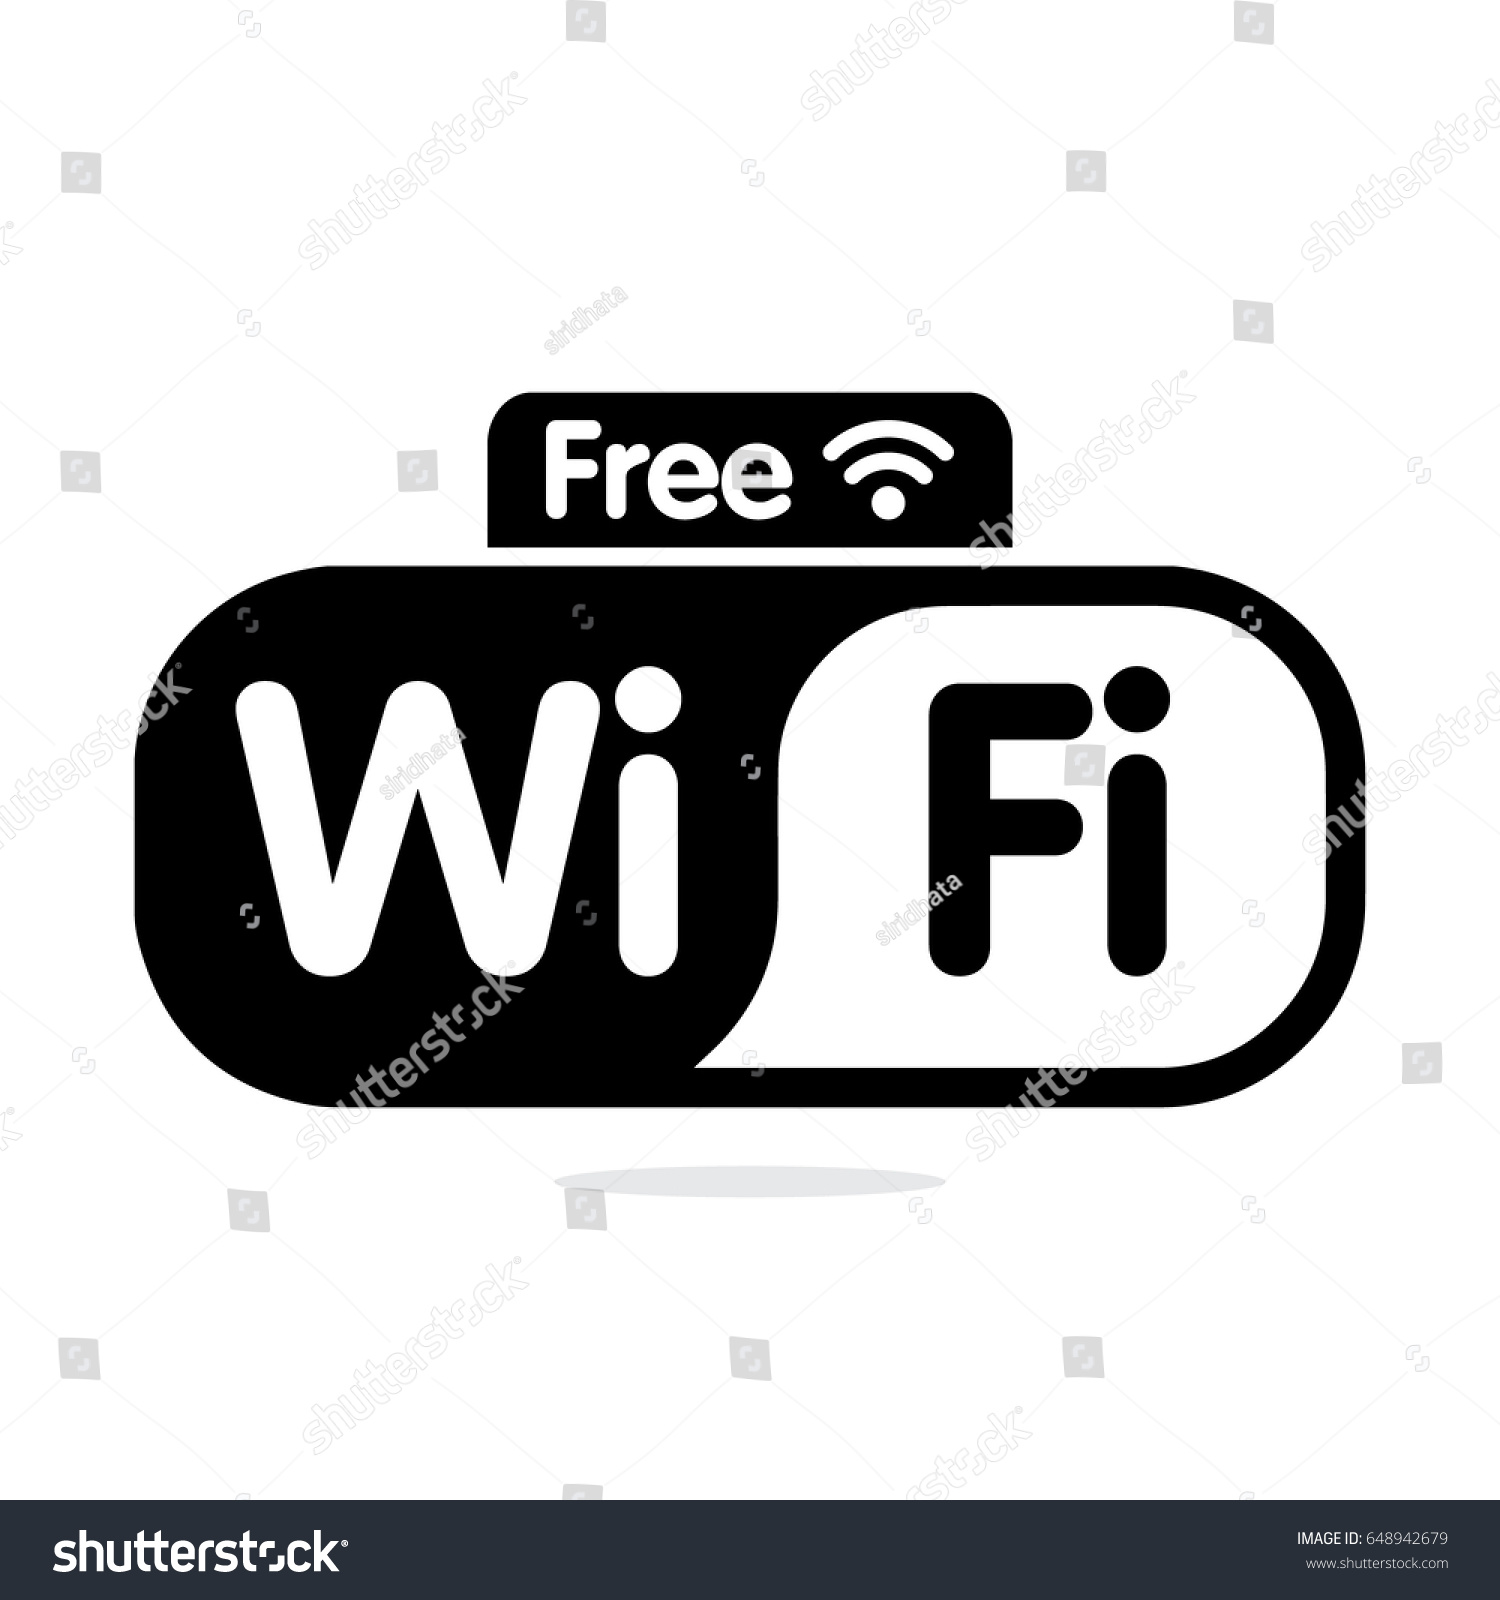 Download Free Wifi Sign Stock Vector Royalty Free 648942679